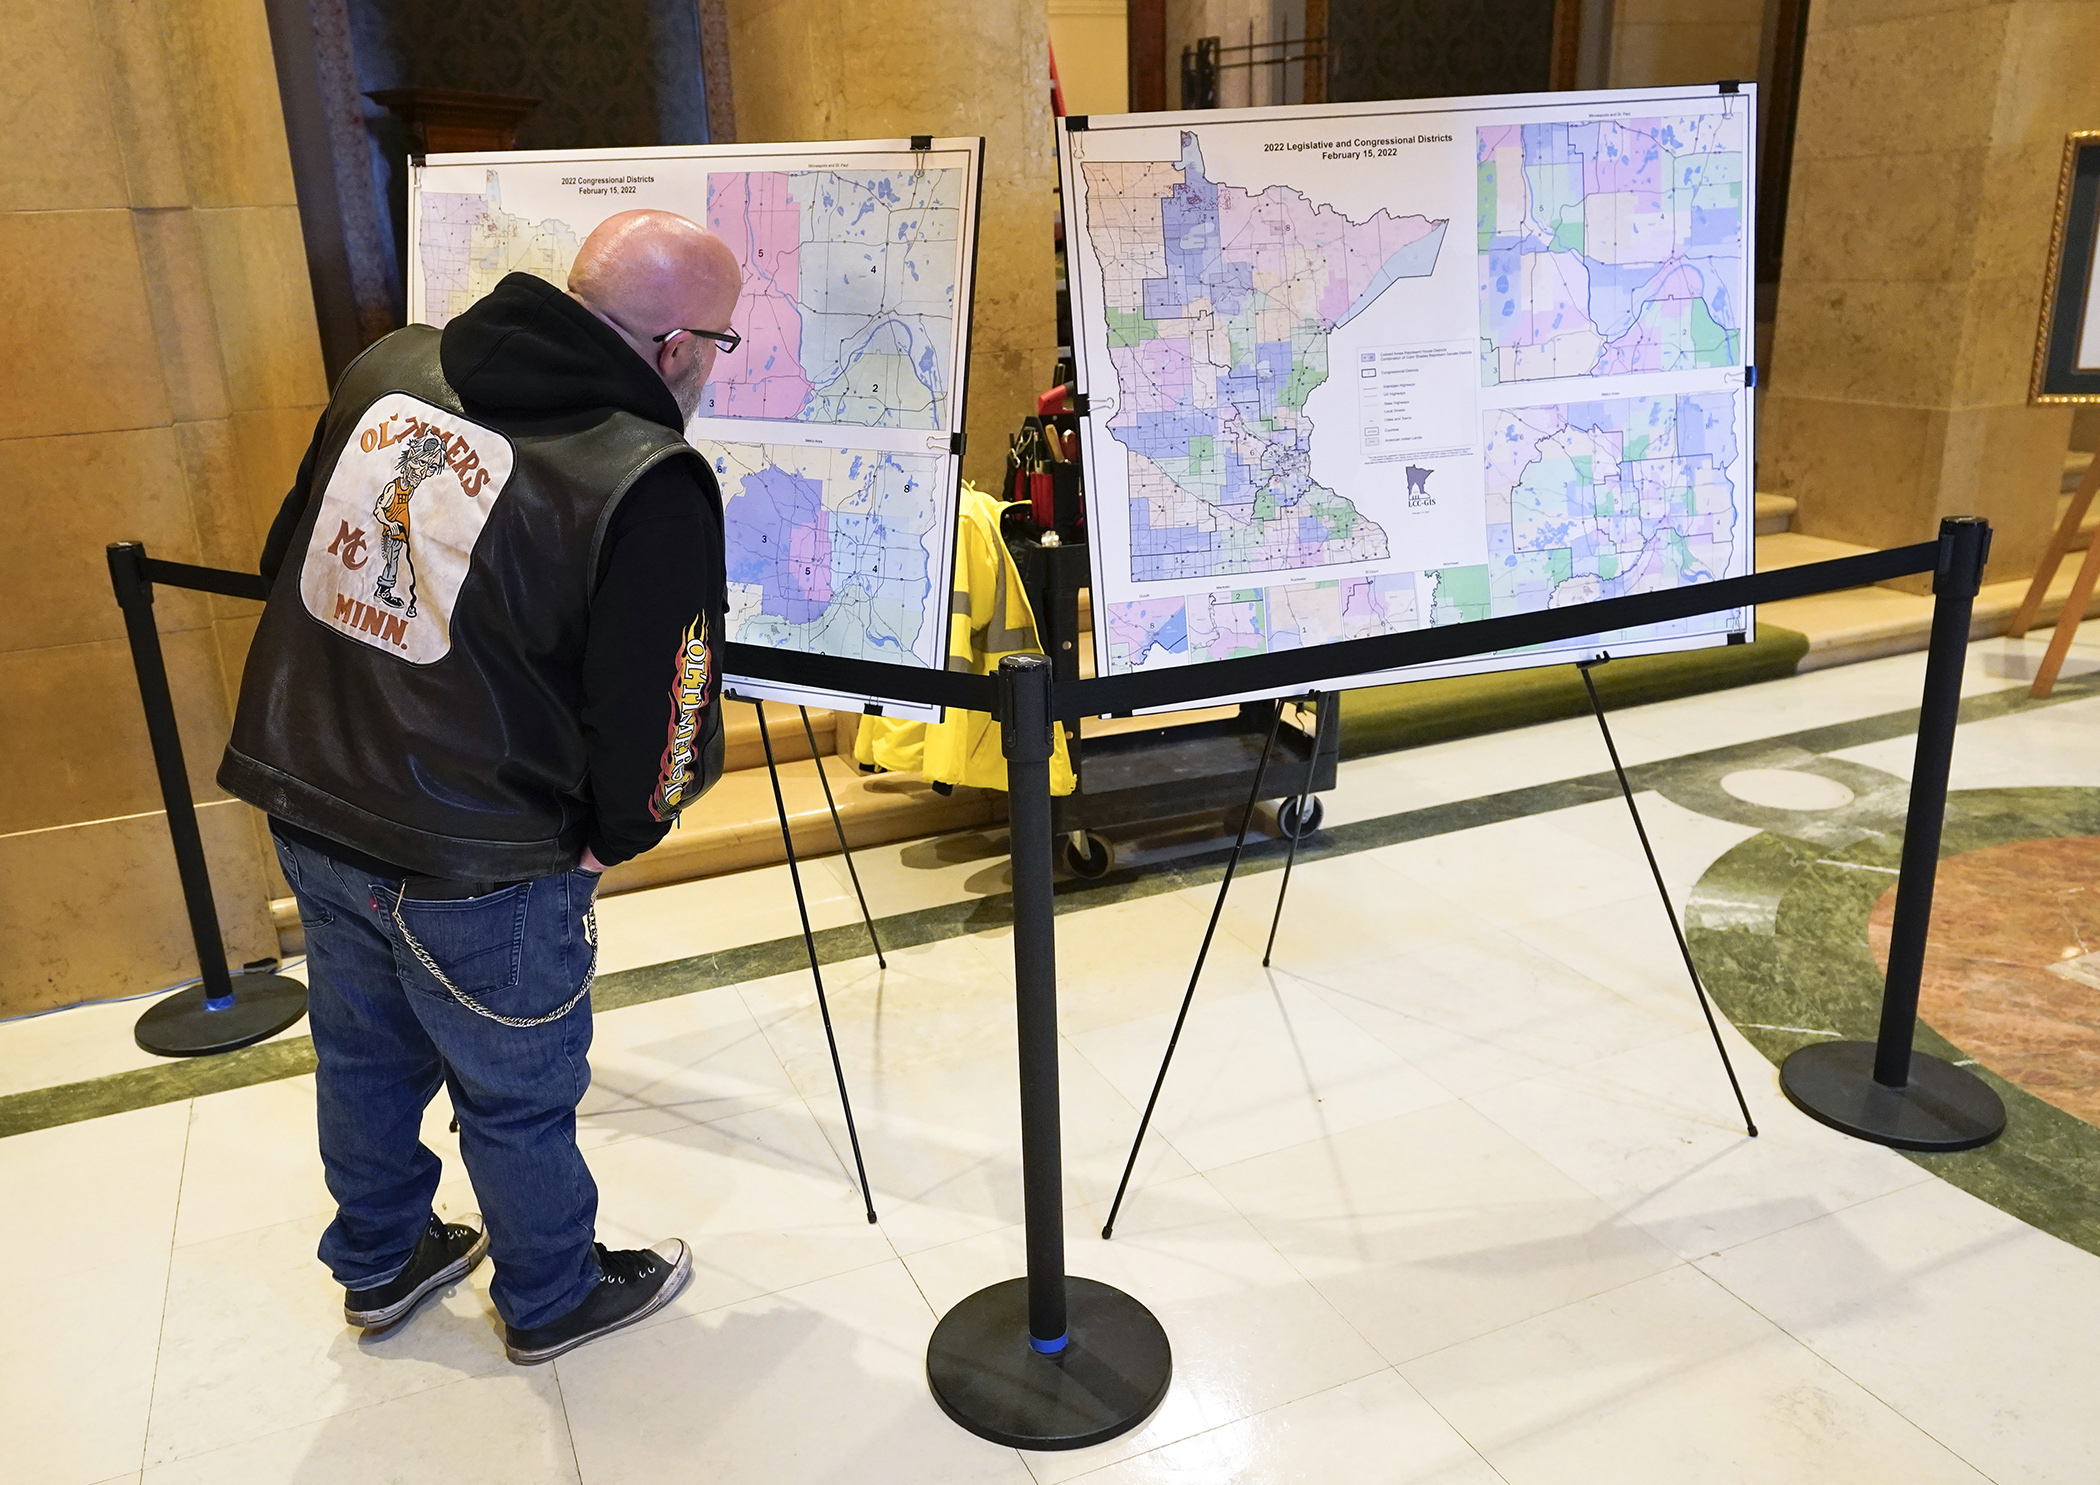 Joe Krauss of Coon Rapids looks over a set of the new congressional and legislative district maps on display outside the House Chamber Feb. 16. (Photo by Paul Battaglia)